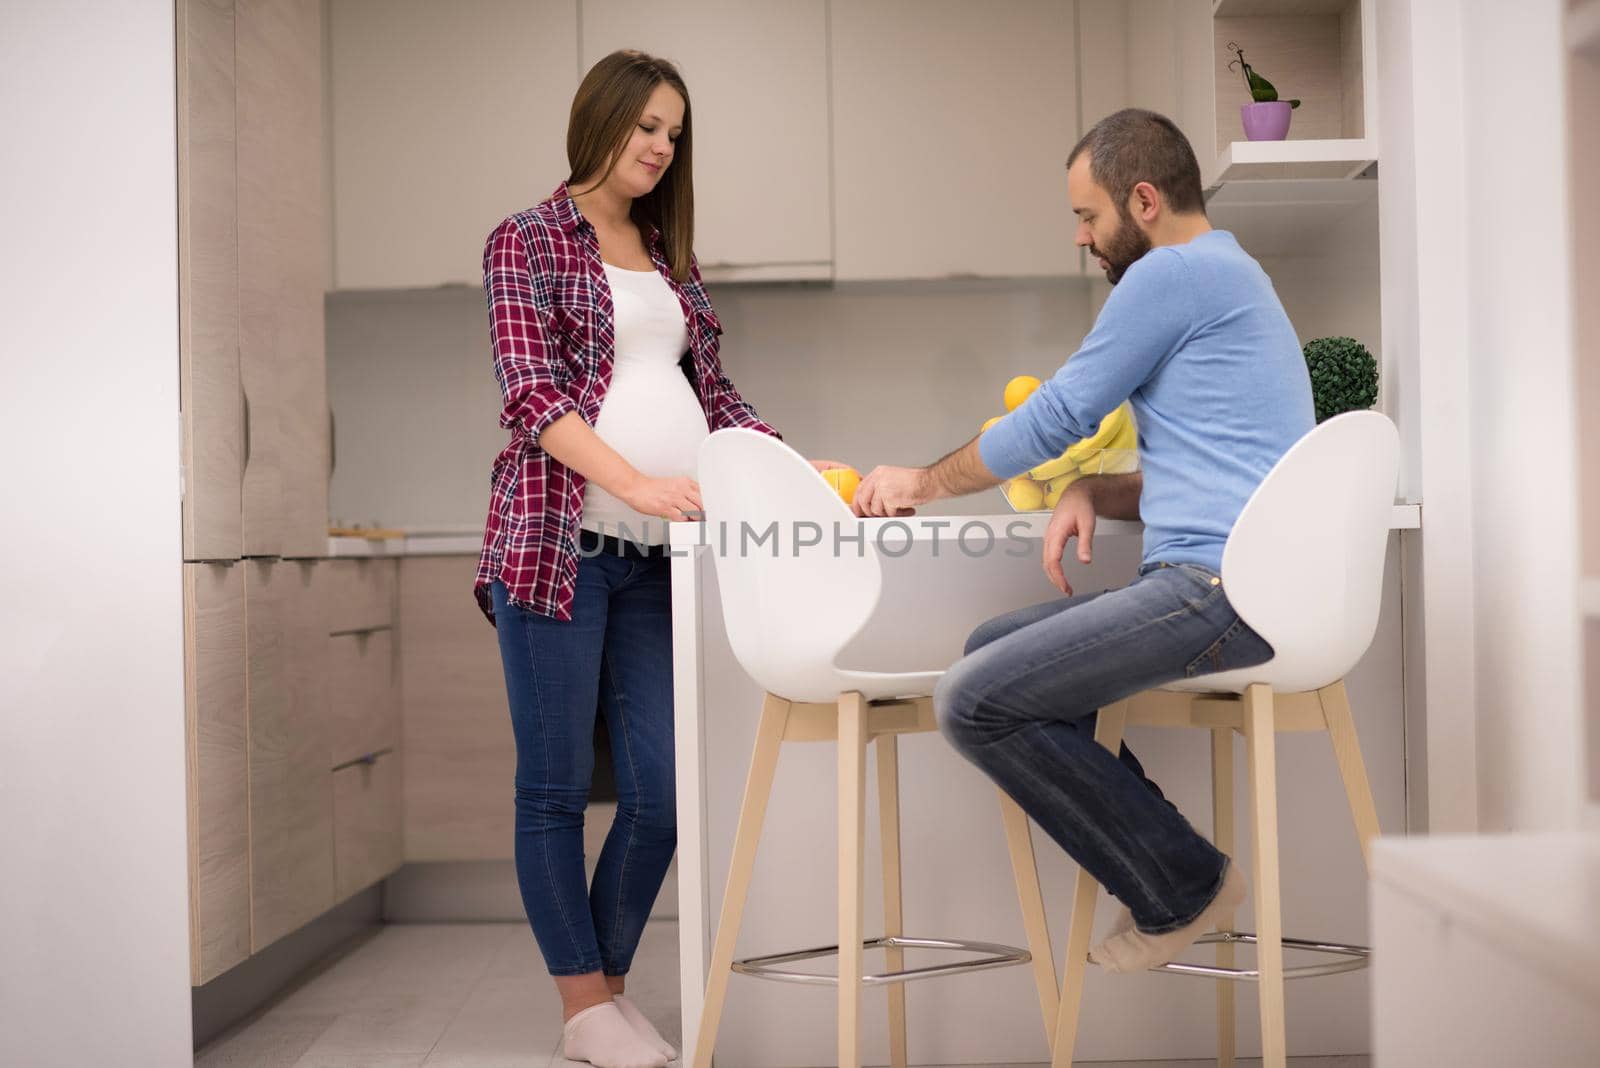 young pregnant couple cooking food fruit lemon juice at kitchen, lifestyle healthy pregnancy happy life concept